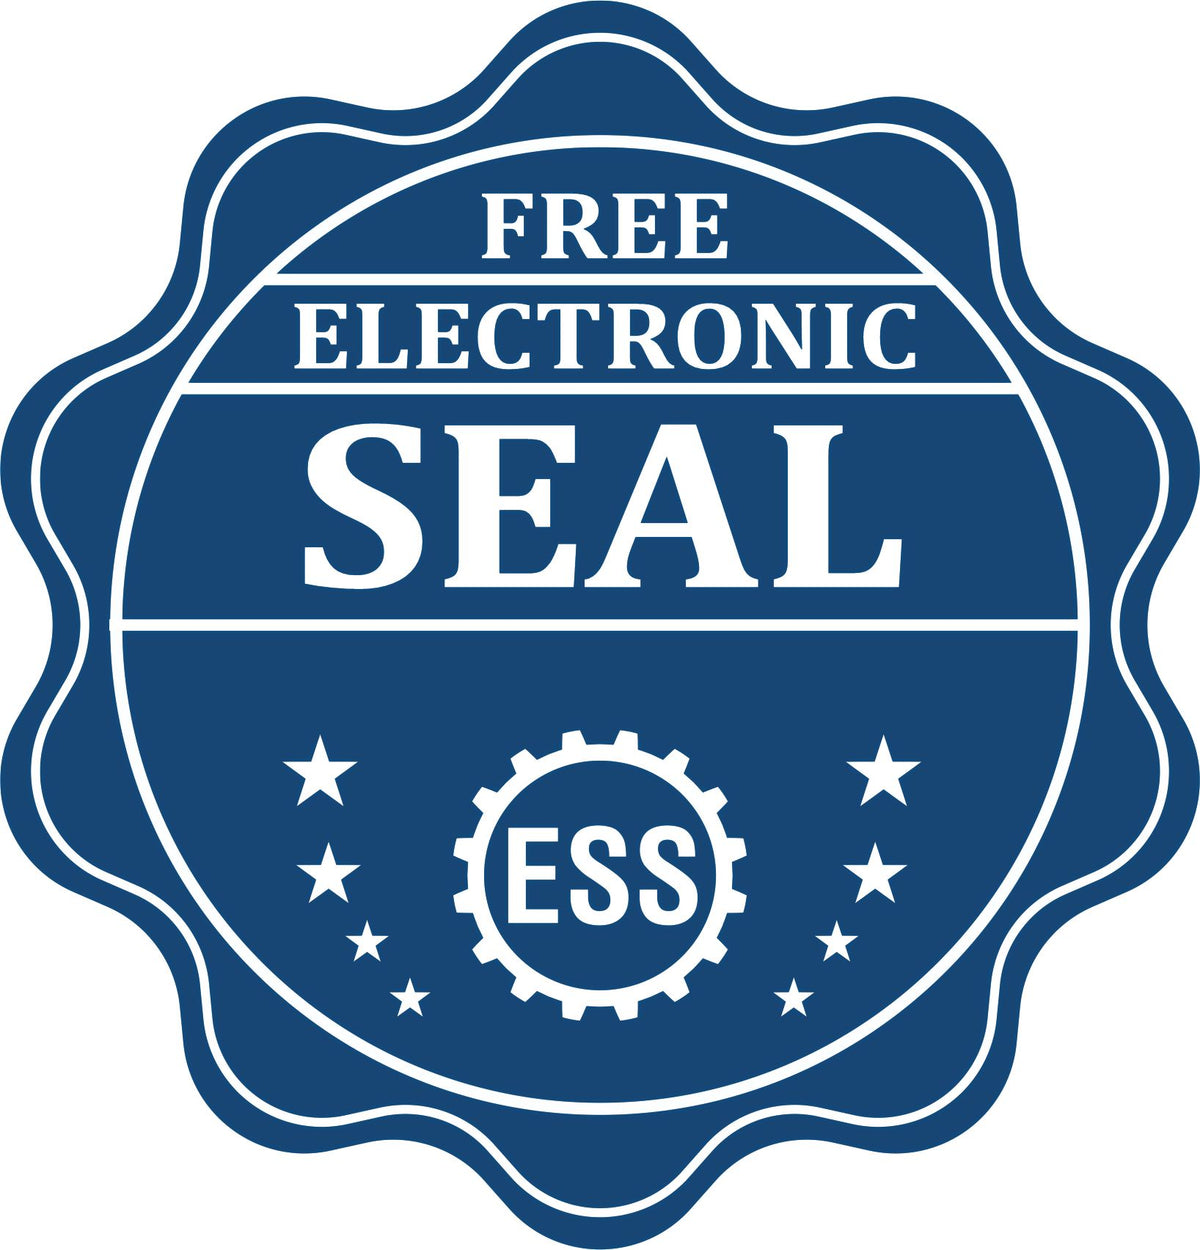 A badge showing a free electronic seal for the Soft South Dakota Professional Engineer Seal with stars and the ESS gear on the emblem.